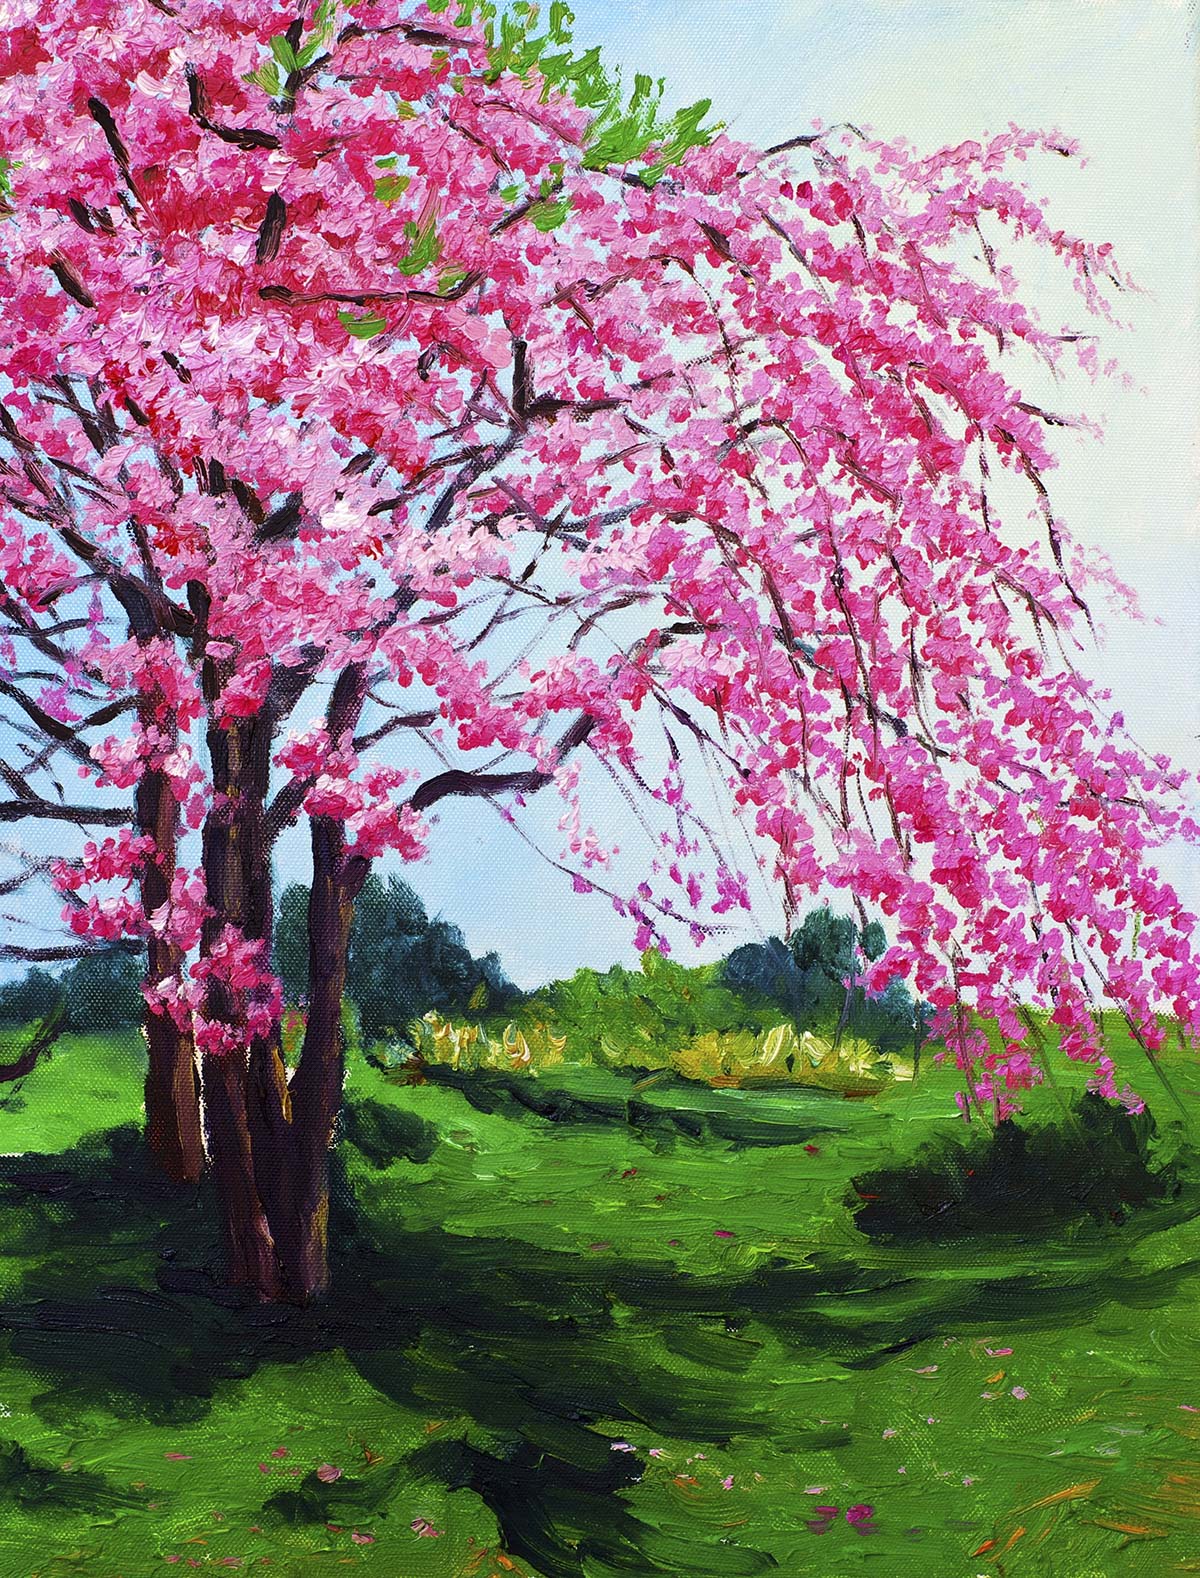 A painting of a tree with pink flowers